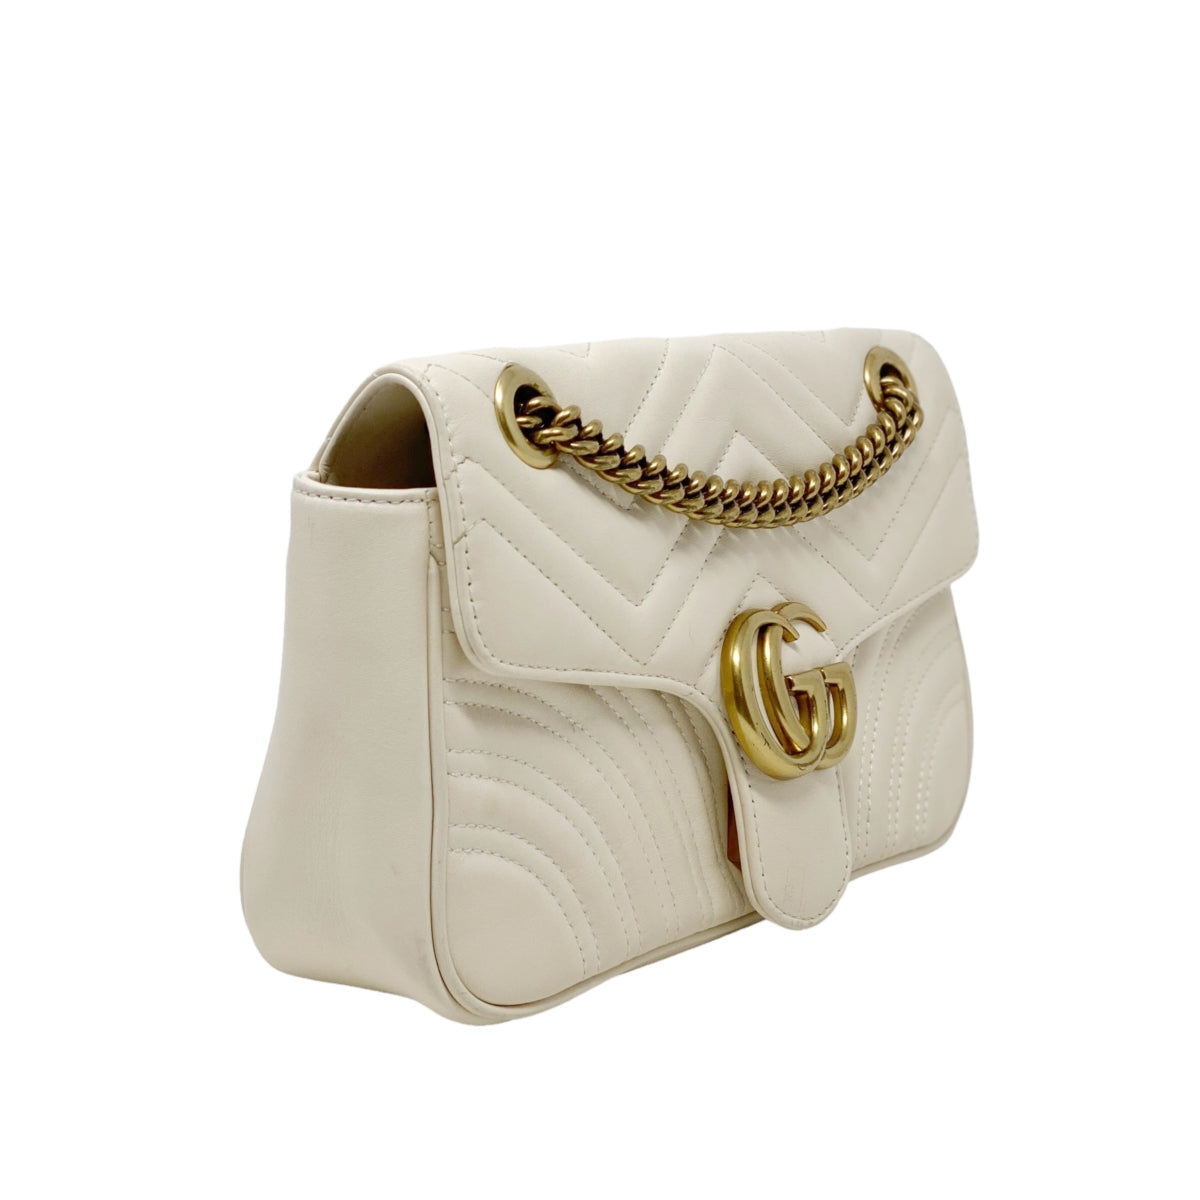 Gucci Ivory Small GG Marmont Bag